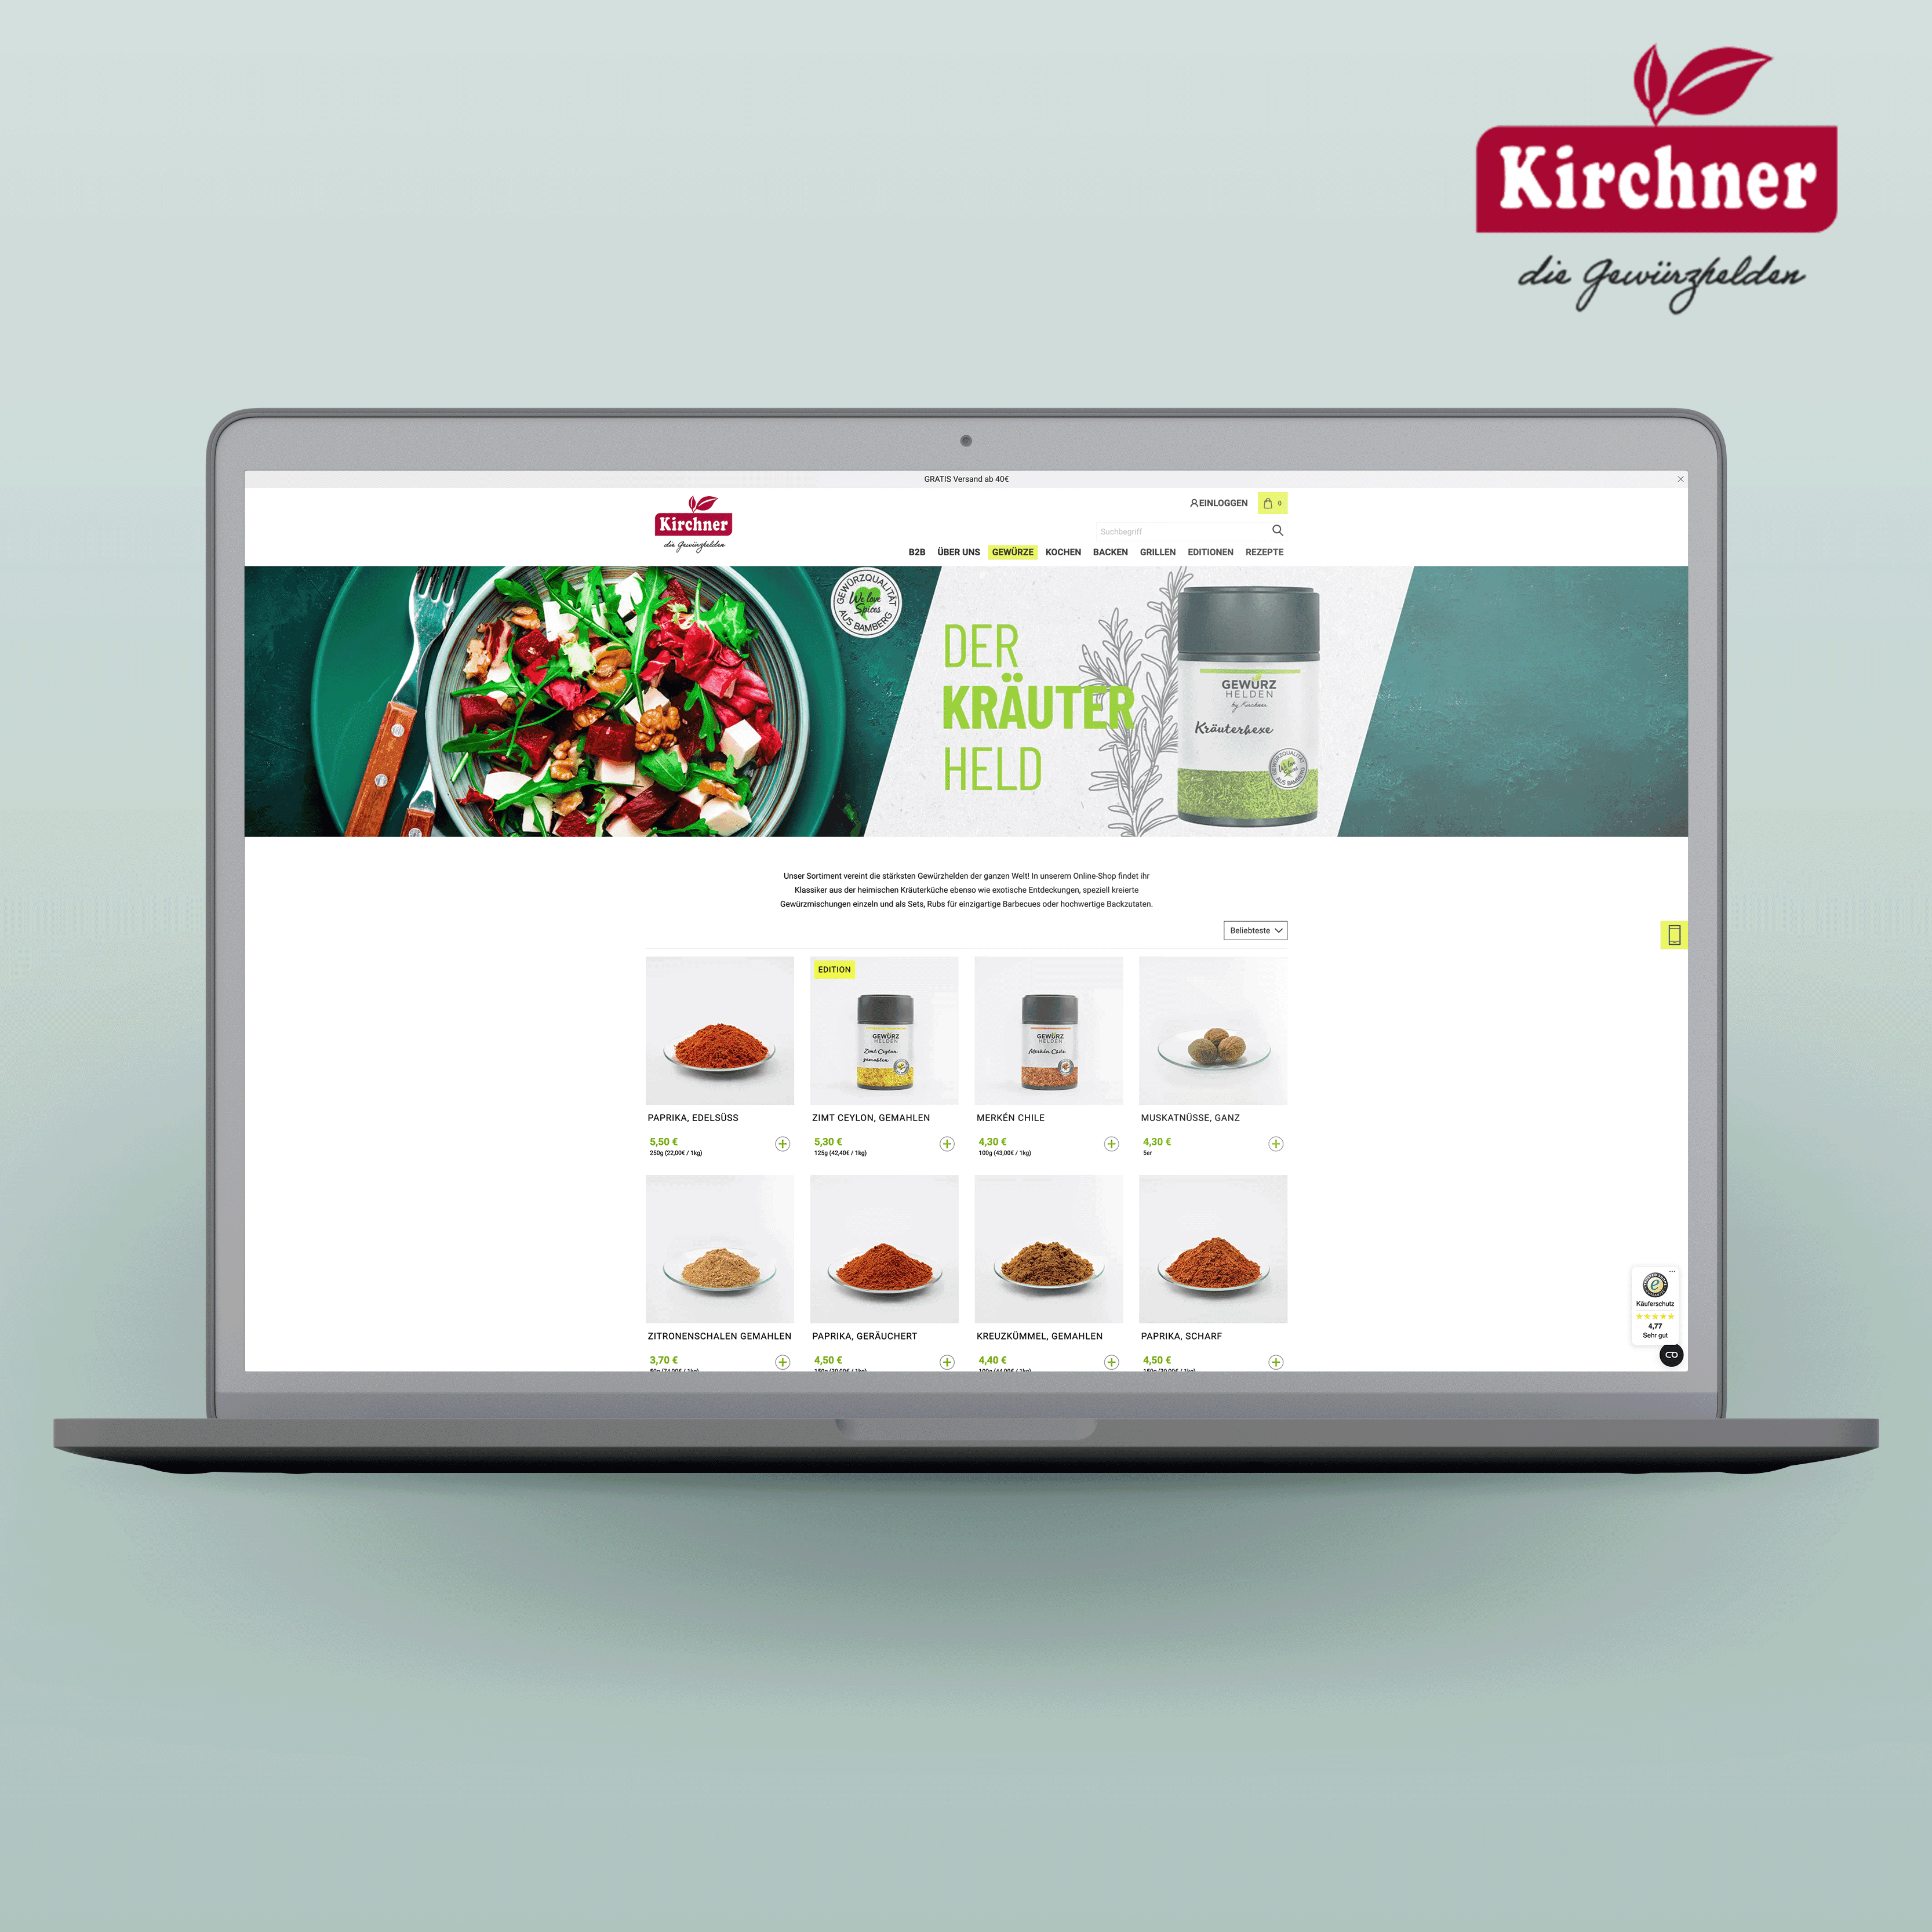 Project: Kirchner Onlineshop